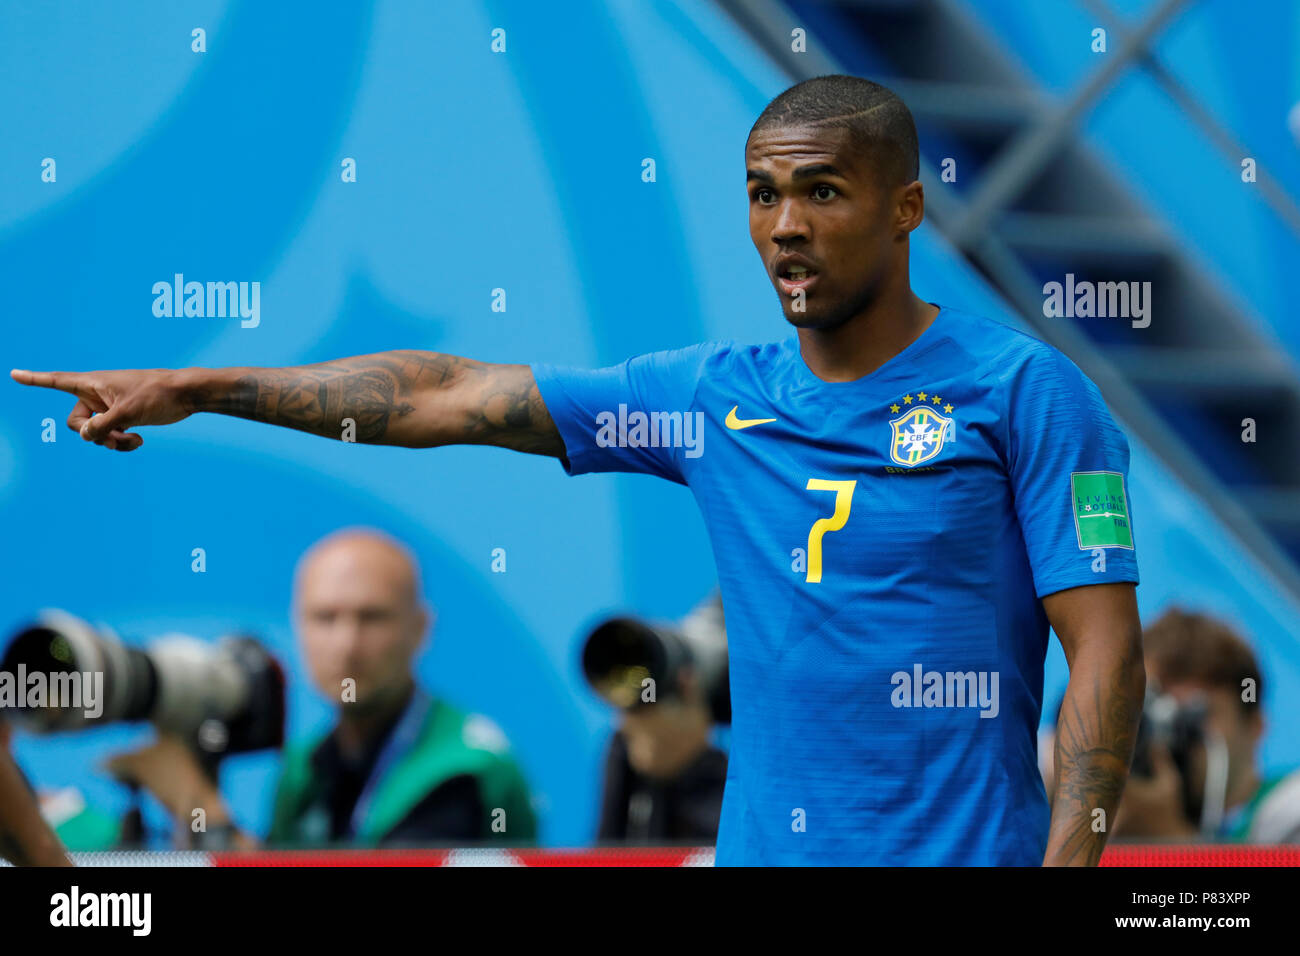 SAINT PETERSBURG, RUSSIA - JUNE 22: Douglas Costa of Brazil national team gestures during the 2018 FIFA World Cup Russia group E match between Brazil and Costa Rica at Saint Petersburg Stadium on June 22, 2018 in Saint Petersburg, Russia. Stock Photo